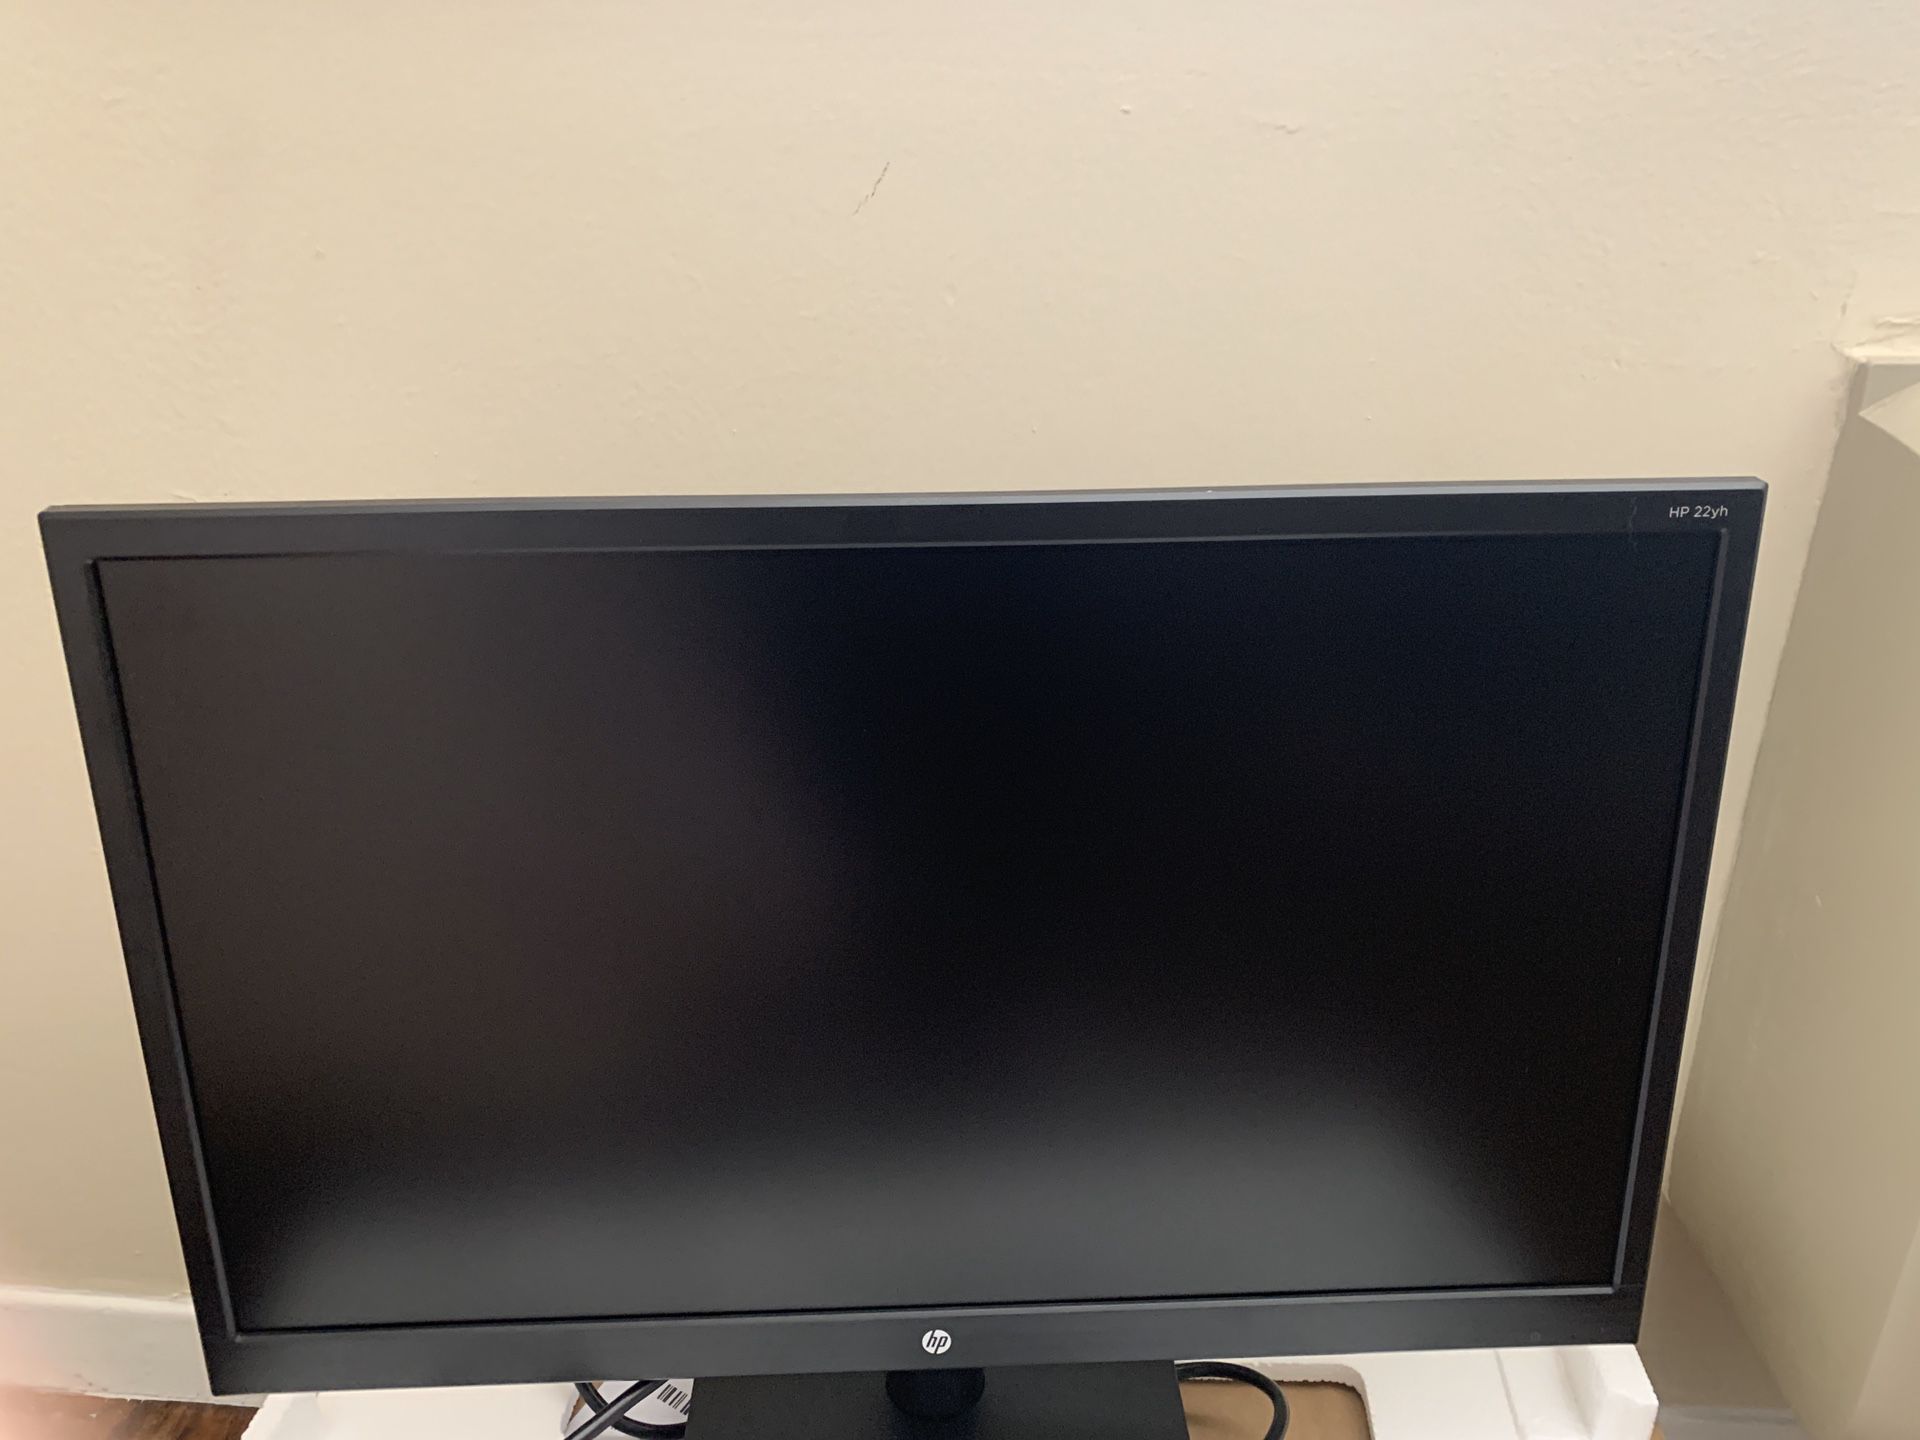 Monitor - can be used for parts